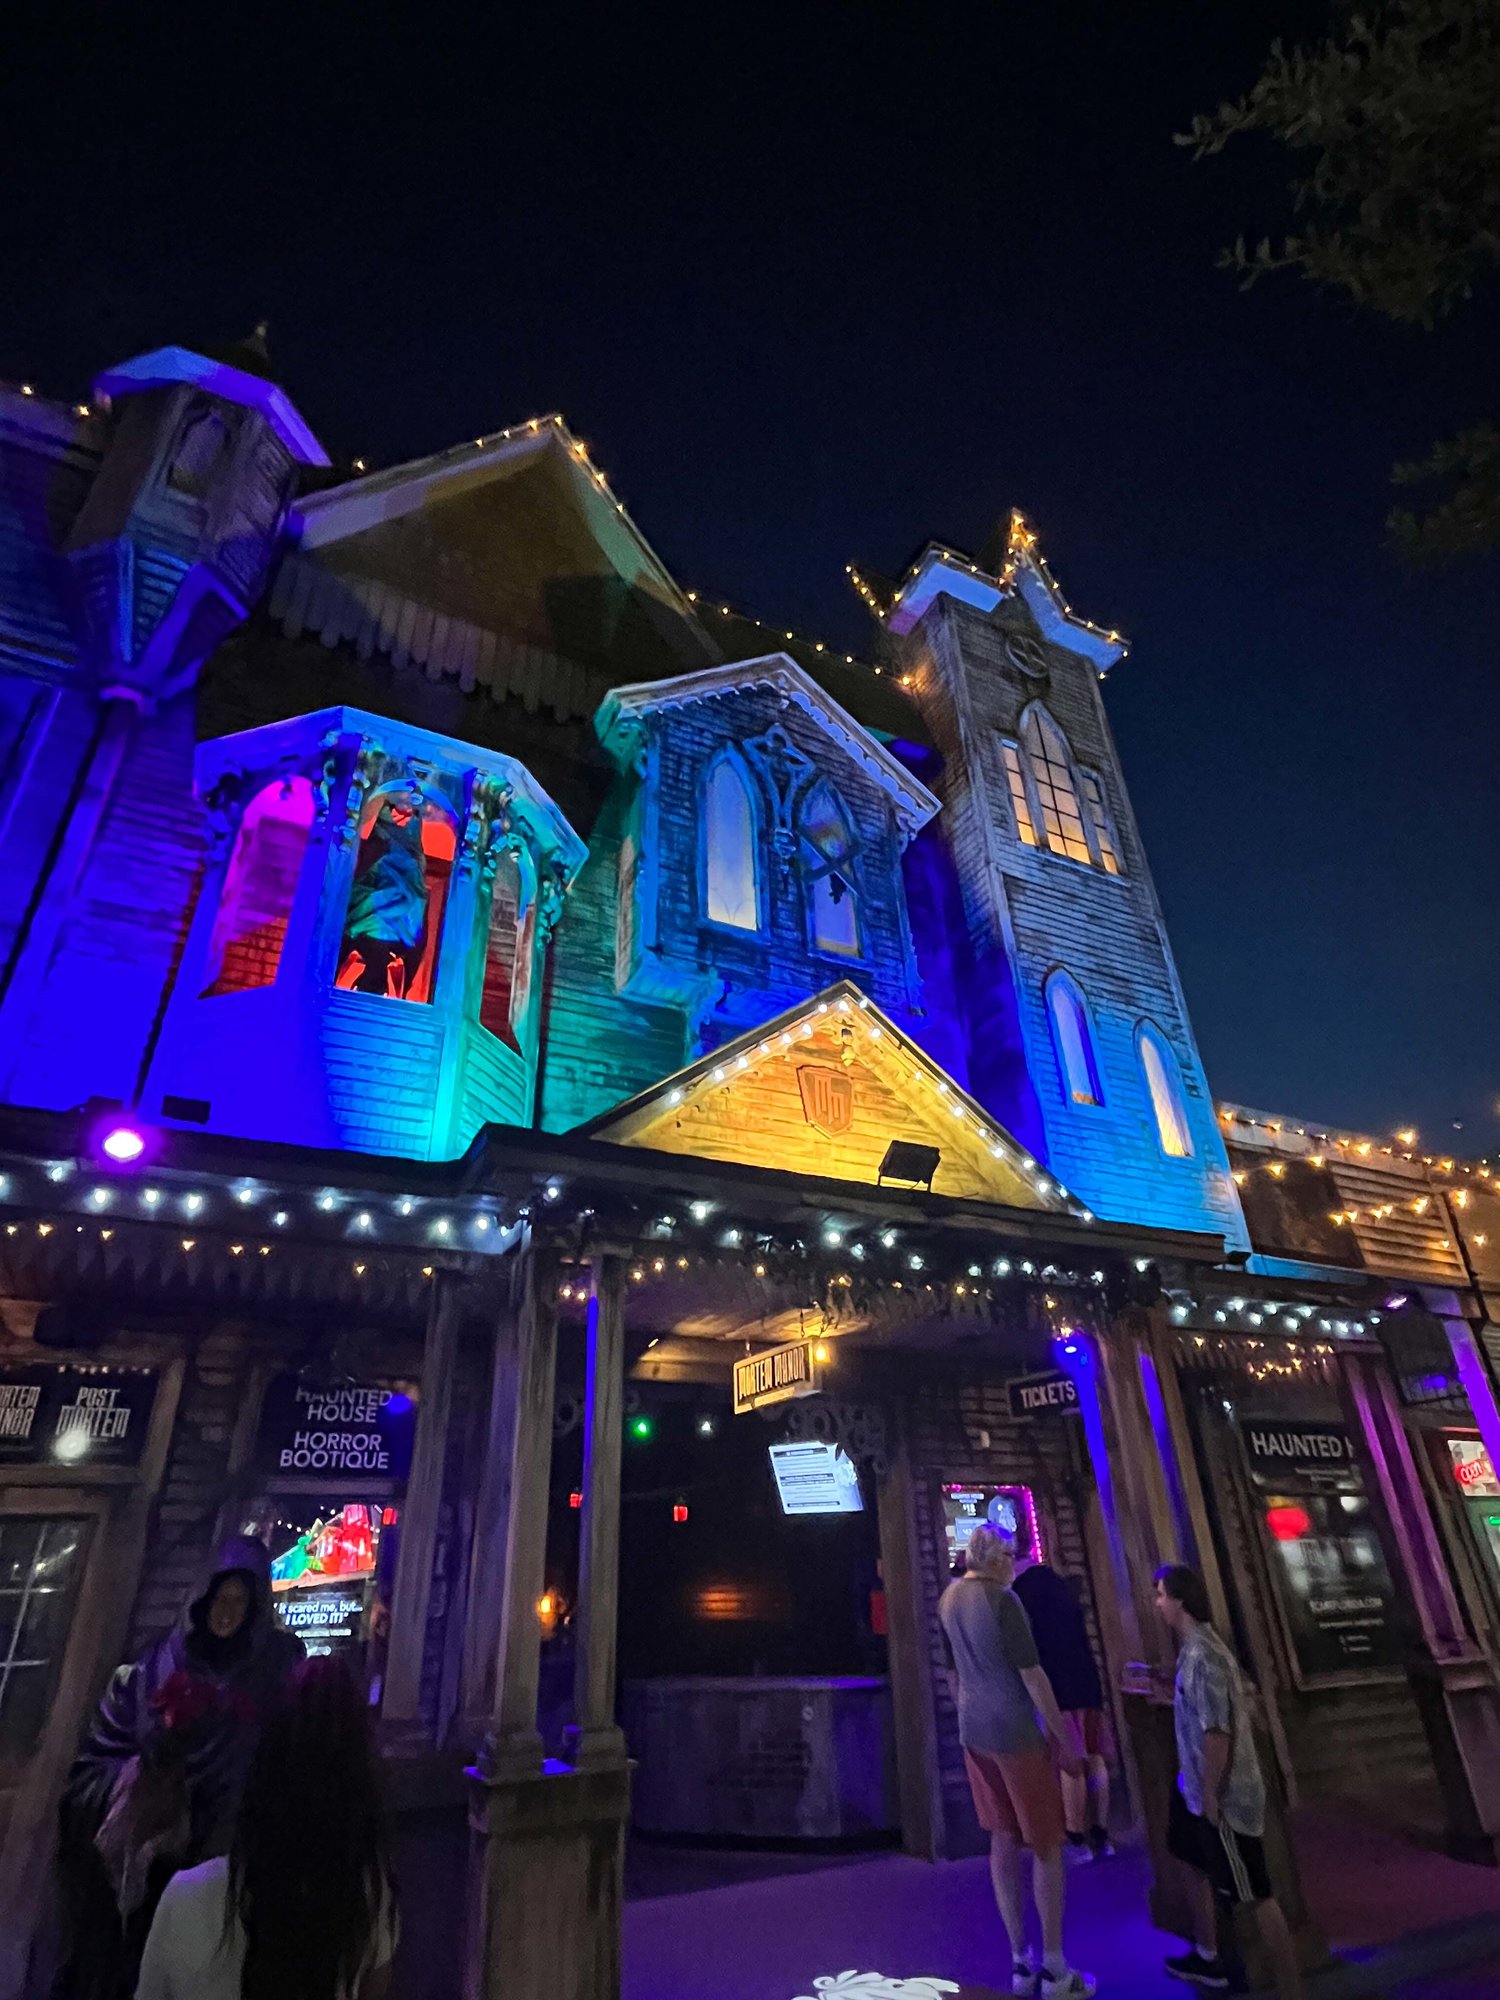 mortem manor at night with blue and purple lights